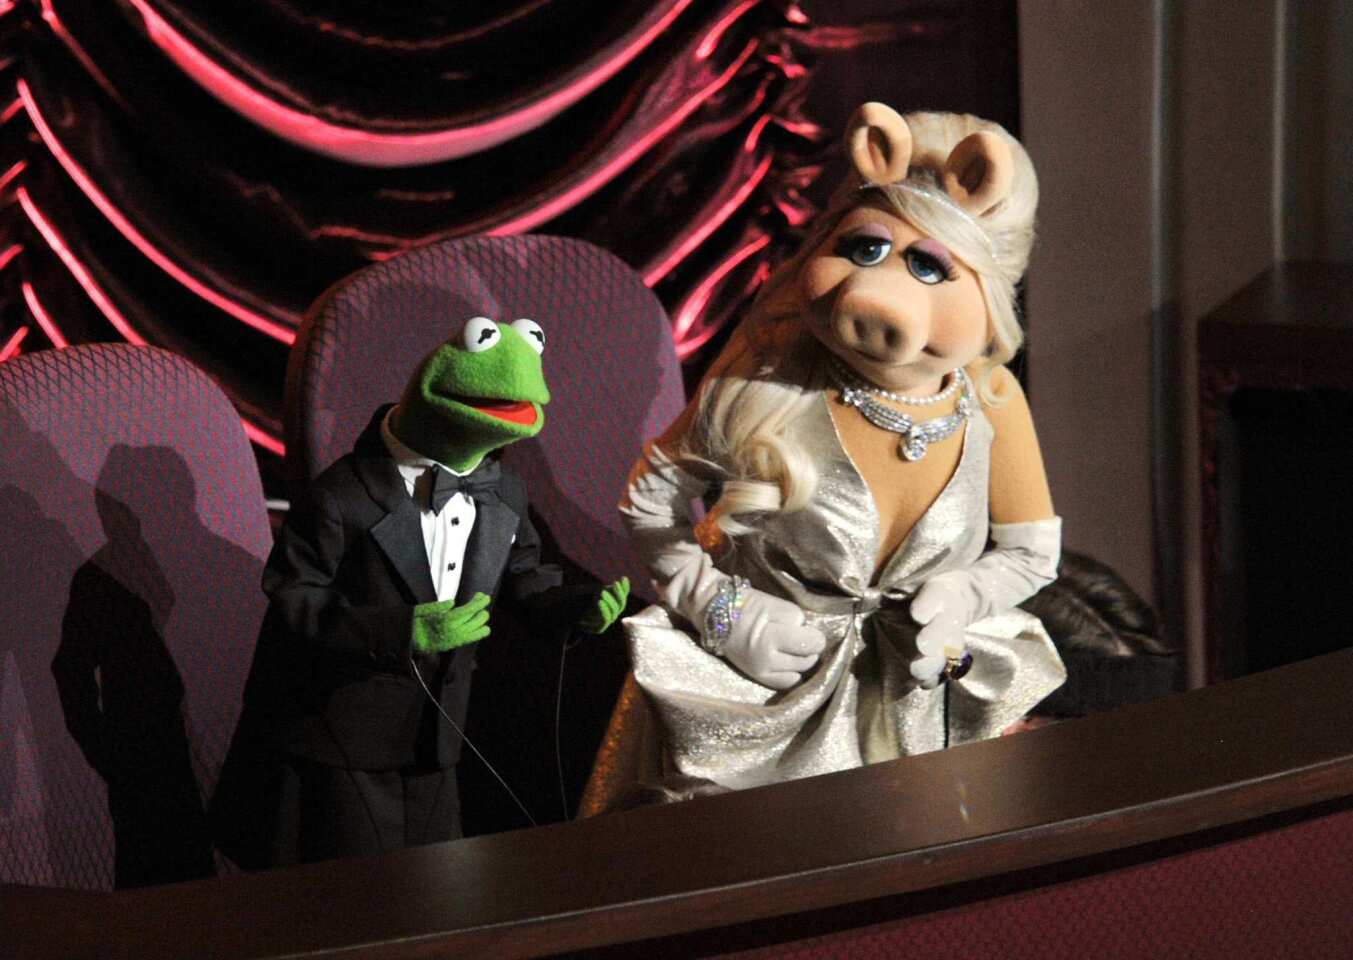 Among the most memorable men (and amphibians) at last night's Academy Awards were a Brooks Brothers wearing Kermit the Frog.